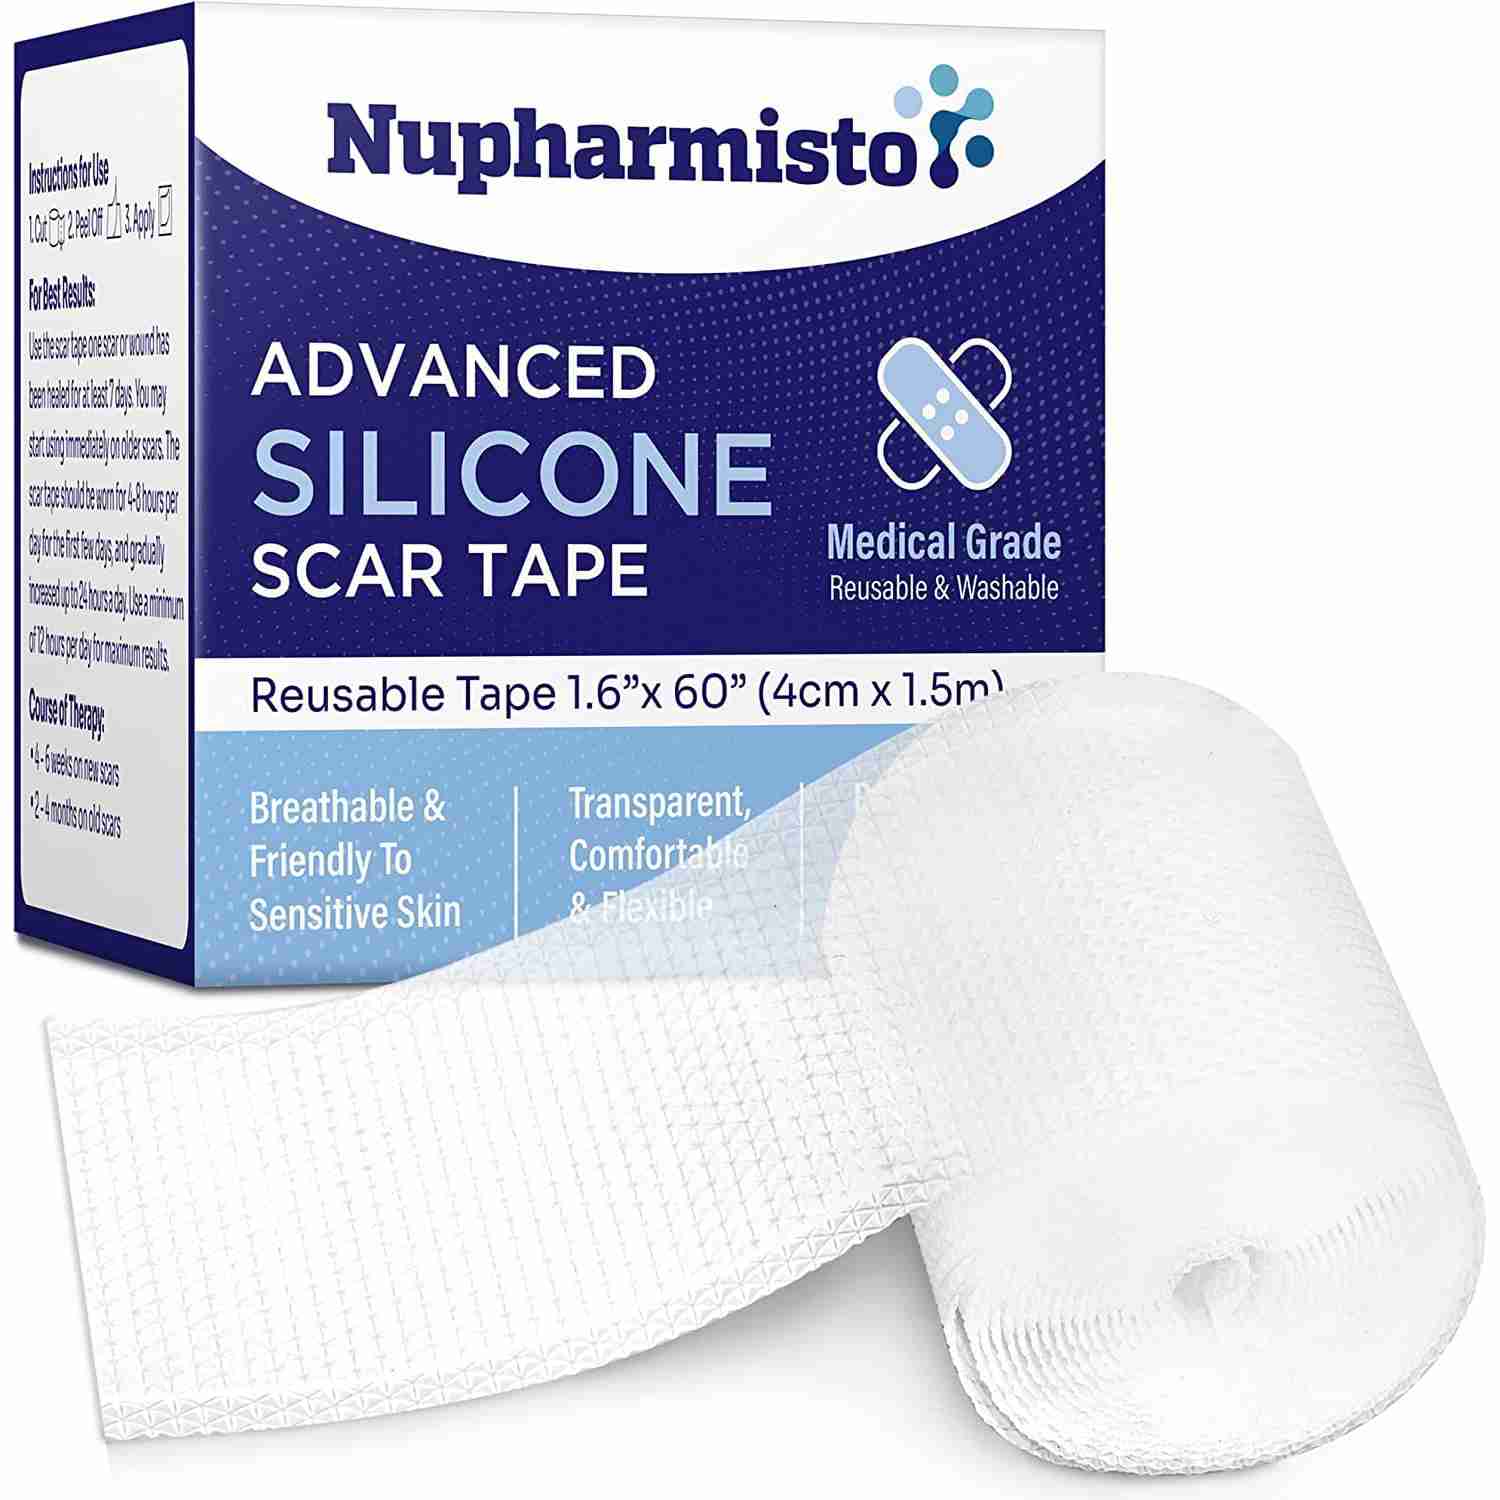 silicone-scar-sheets-nupharmisto with cash back rebate